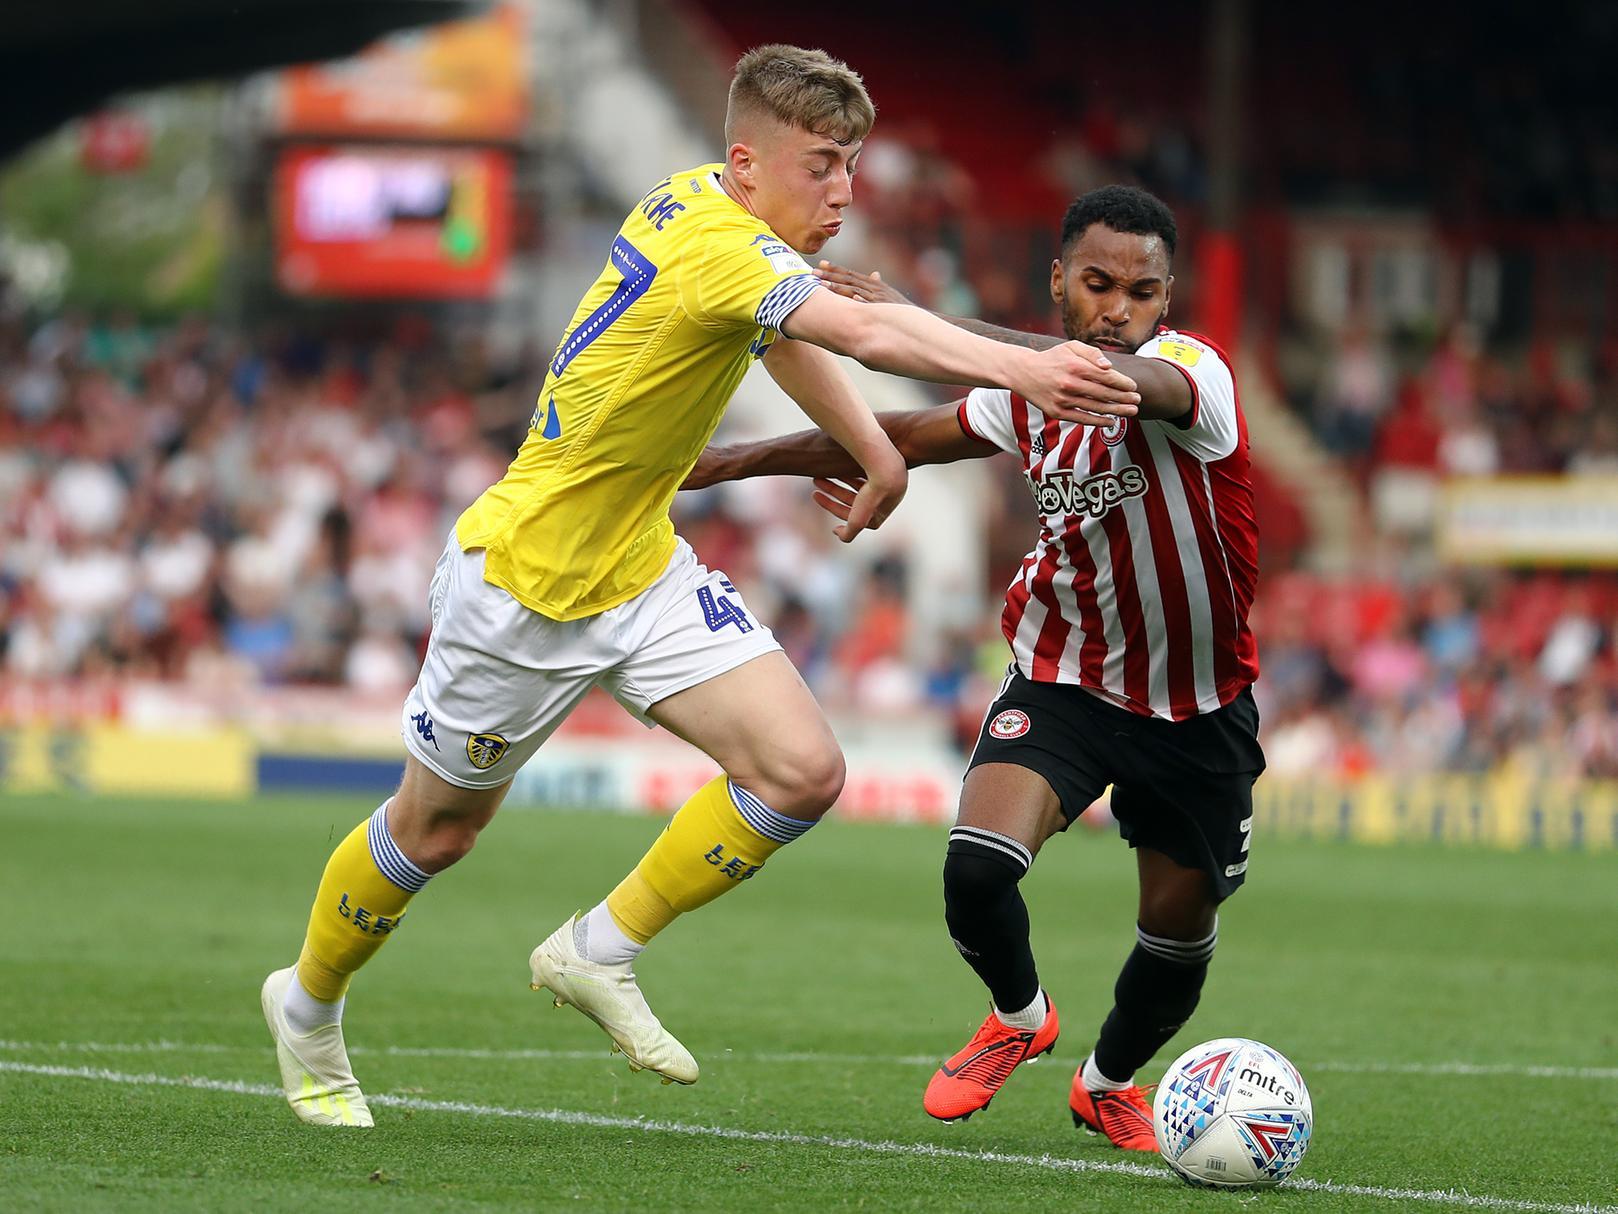 Derby County are the latest side to be linked with Spurs winger Jack Clarke, however, Queens Park Rangers remain the firm favourites to secure a loan move before the deadline. (Daily Mail)